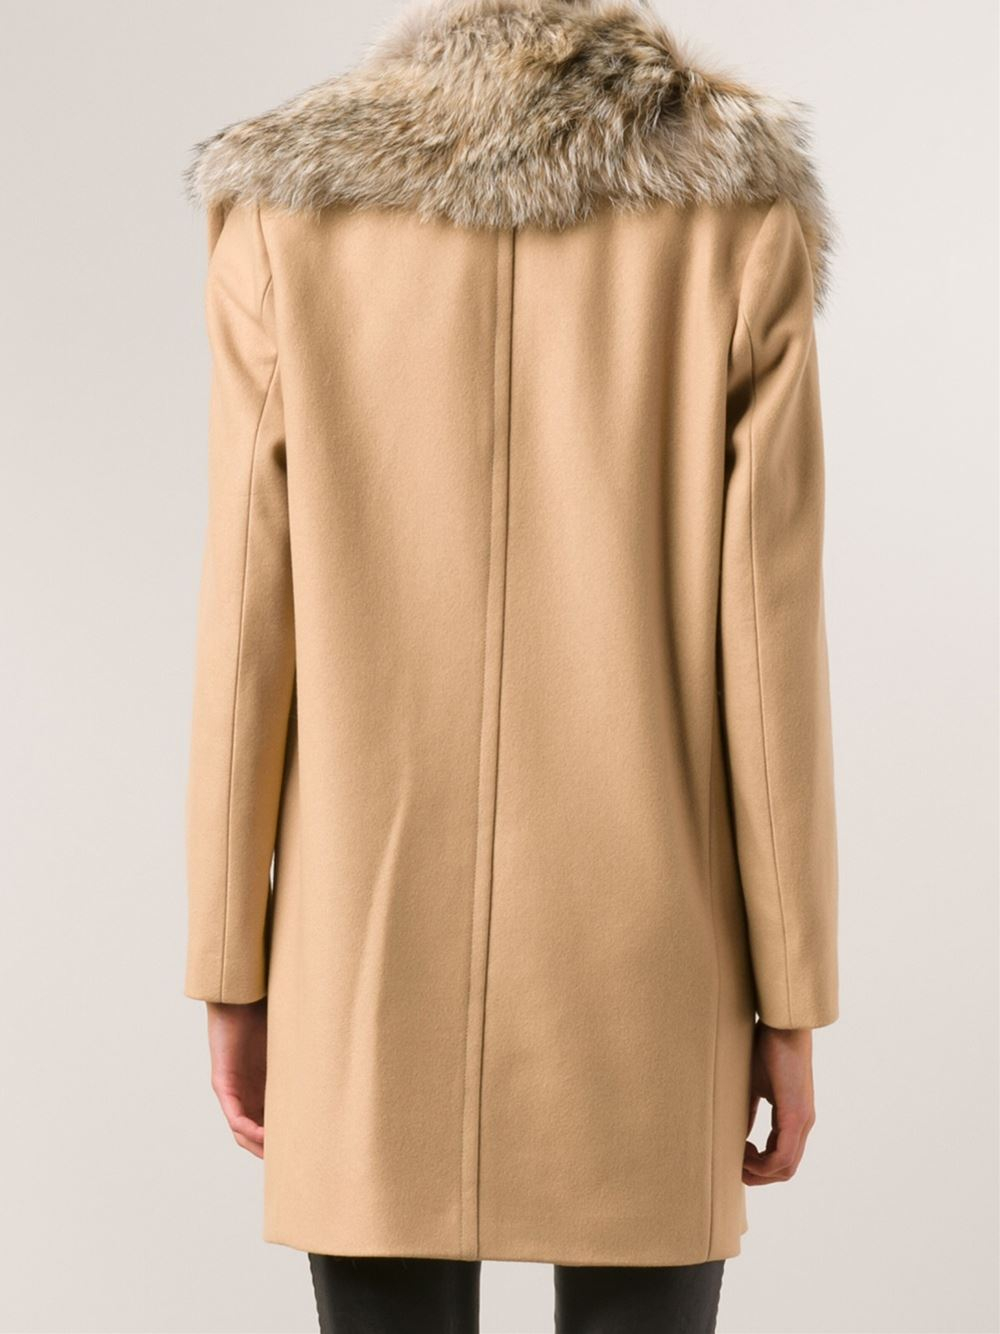 Msgm Double Breasted Coat in Brown | Lyst